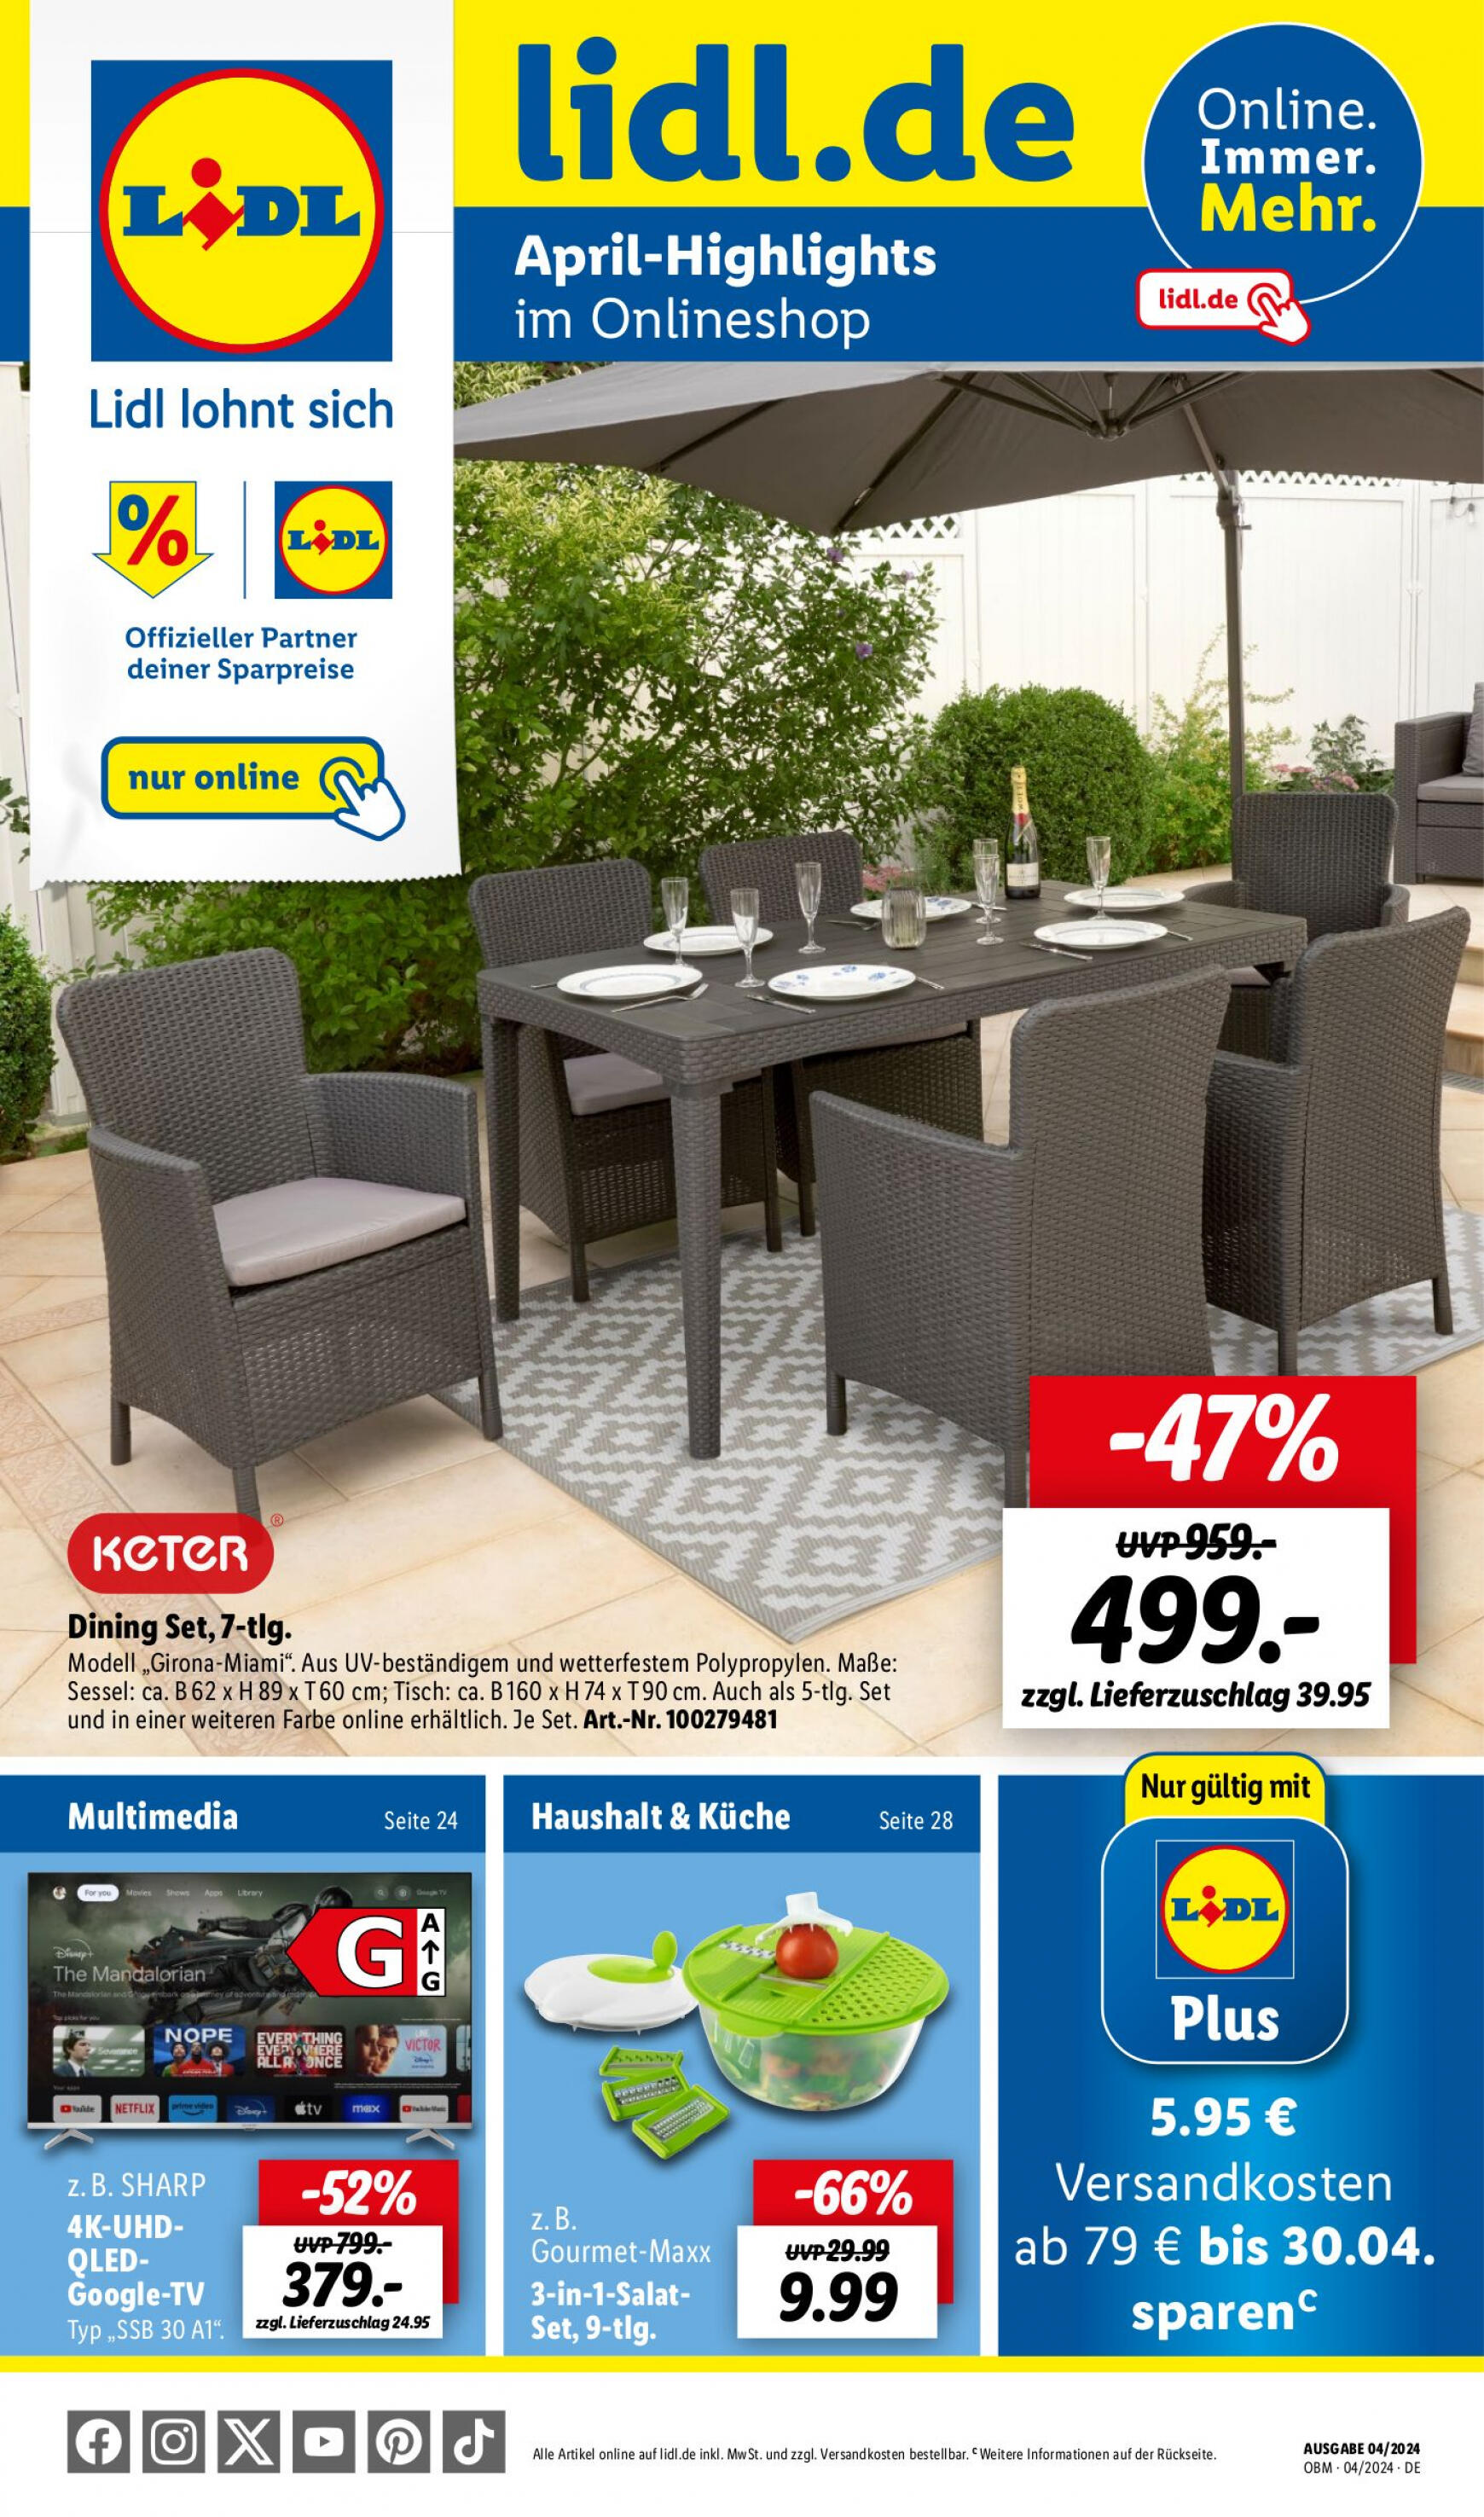 lidl - Flyer Lidl - Aktuelle Onlineshop-Highlights aktuell 01.04. - 30.04. - page: 1